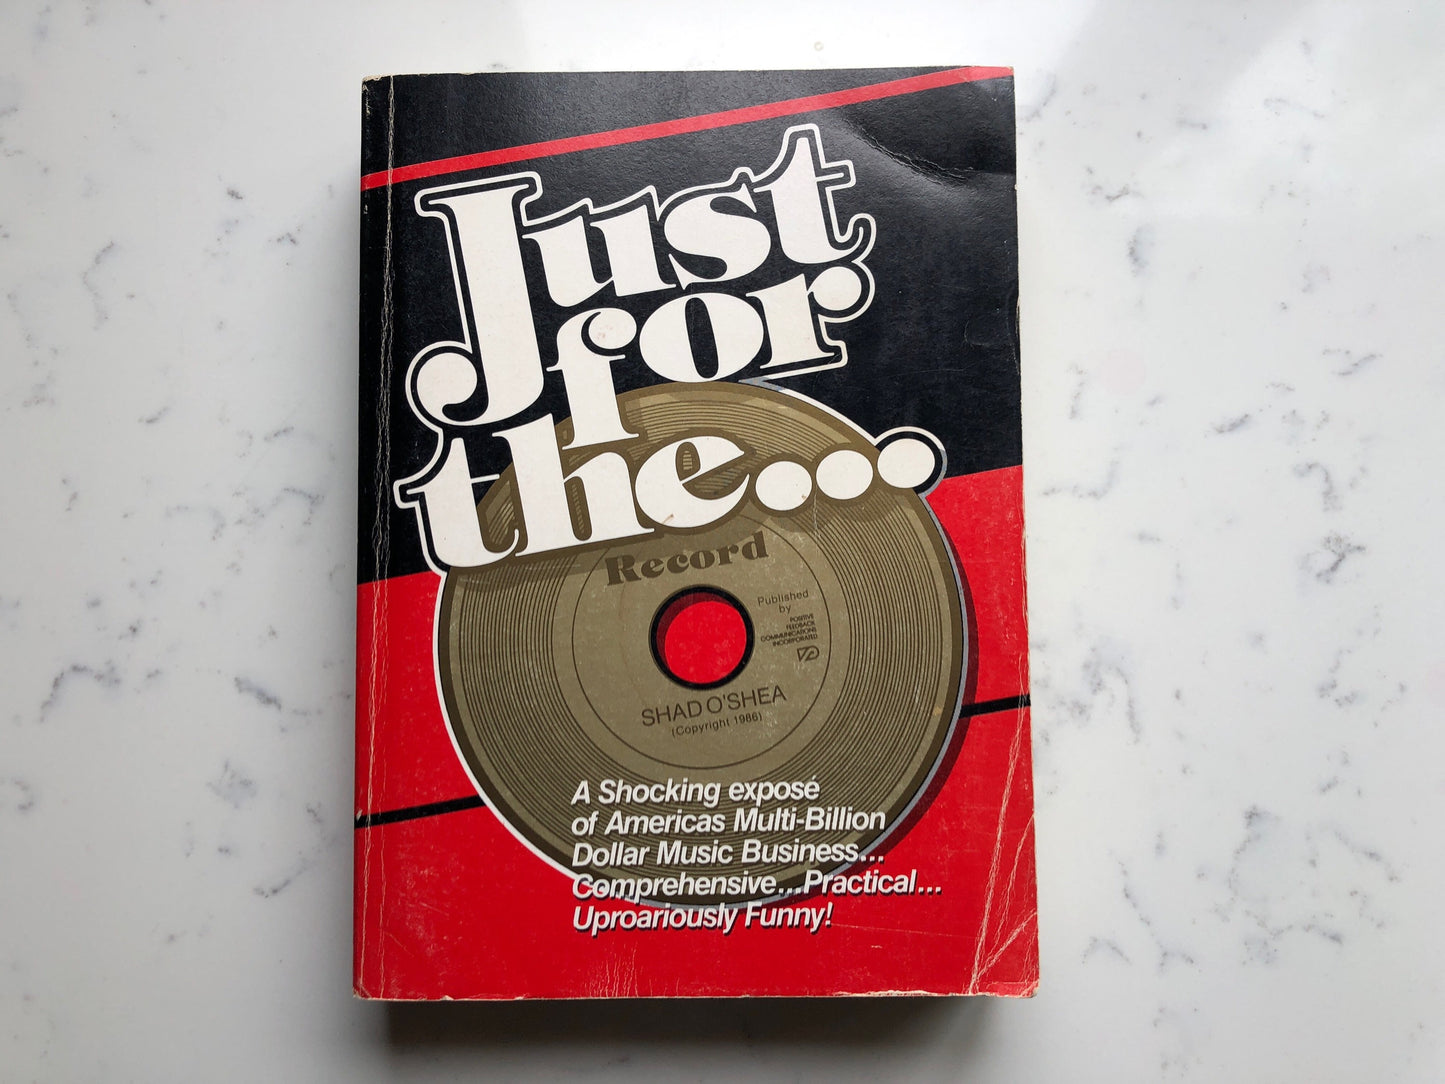 Just for the Record by Shad O'Shea  |  1986 Paperback  |  Signed by Author | 1986 Vintage Music Business Expose